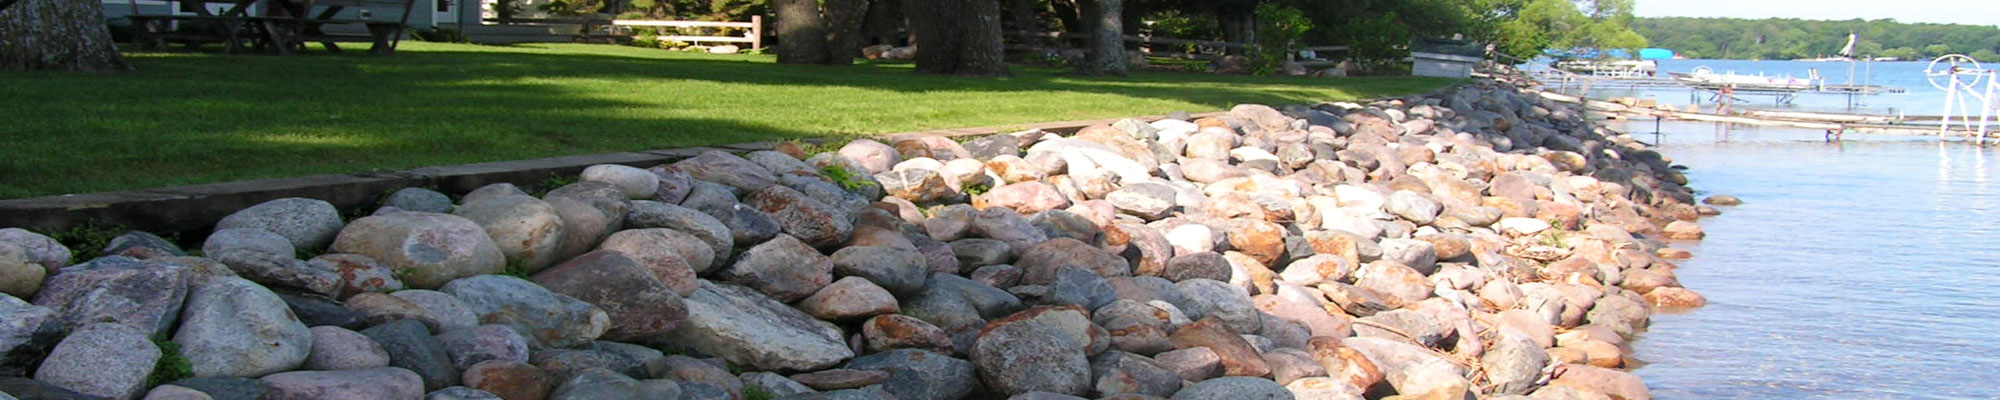 Lakeshore rip-rap of large boulders installed by Exterior Designs of Alexandria for erosion control purposes